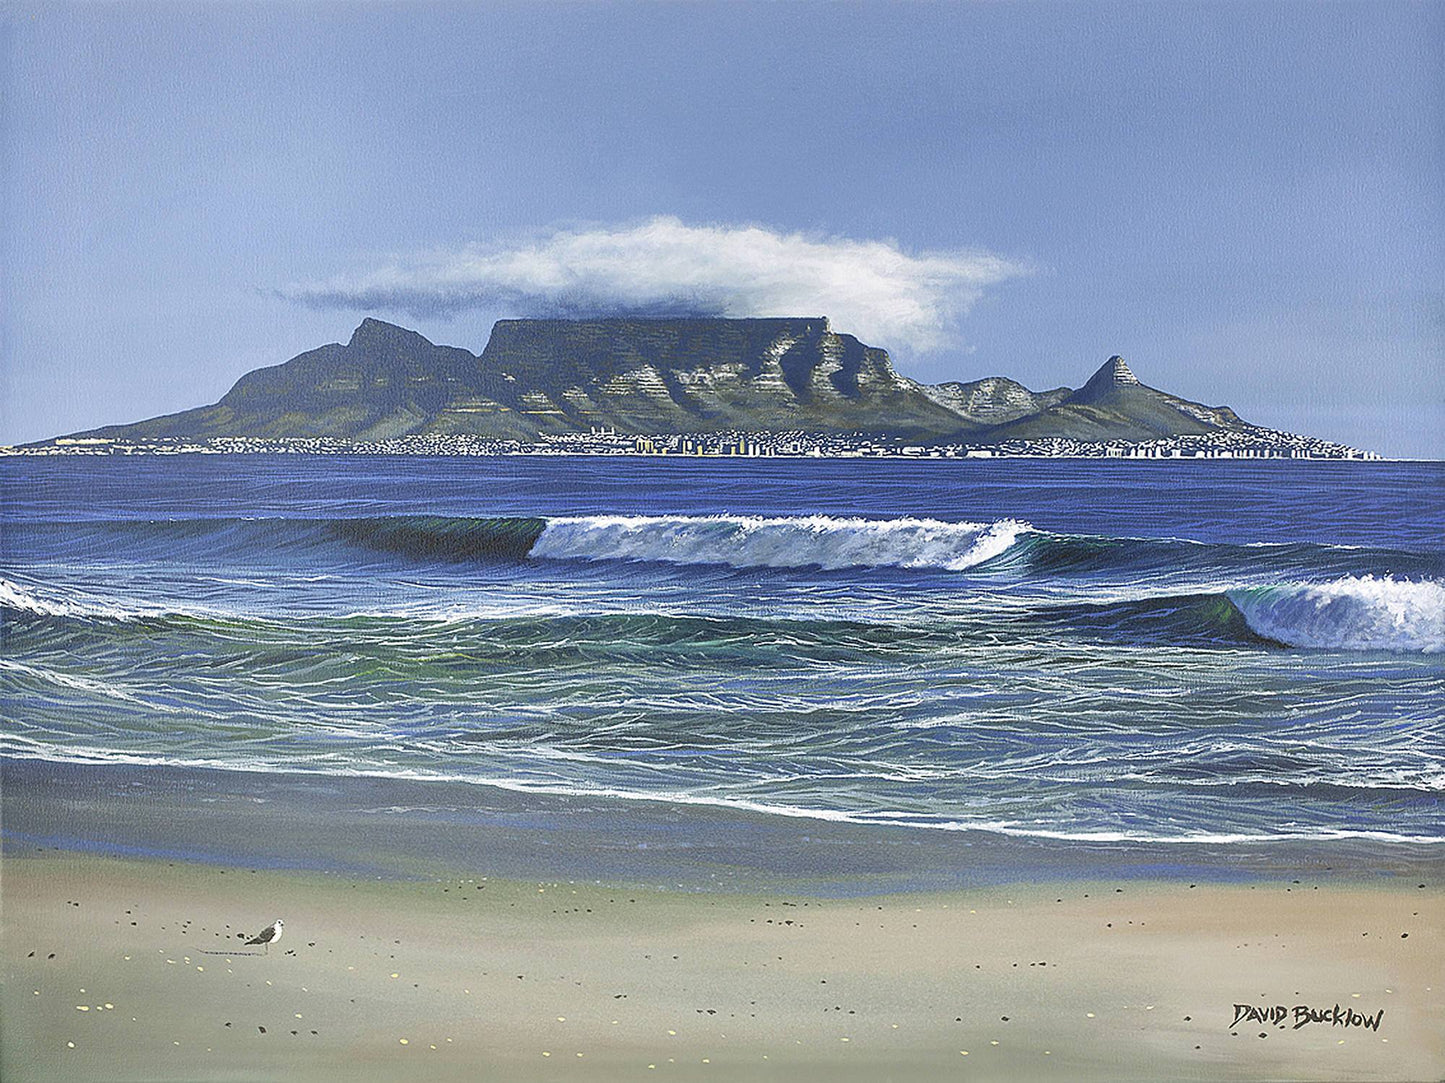 Table Mountain Print by Artist David Bucklow